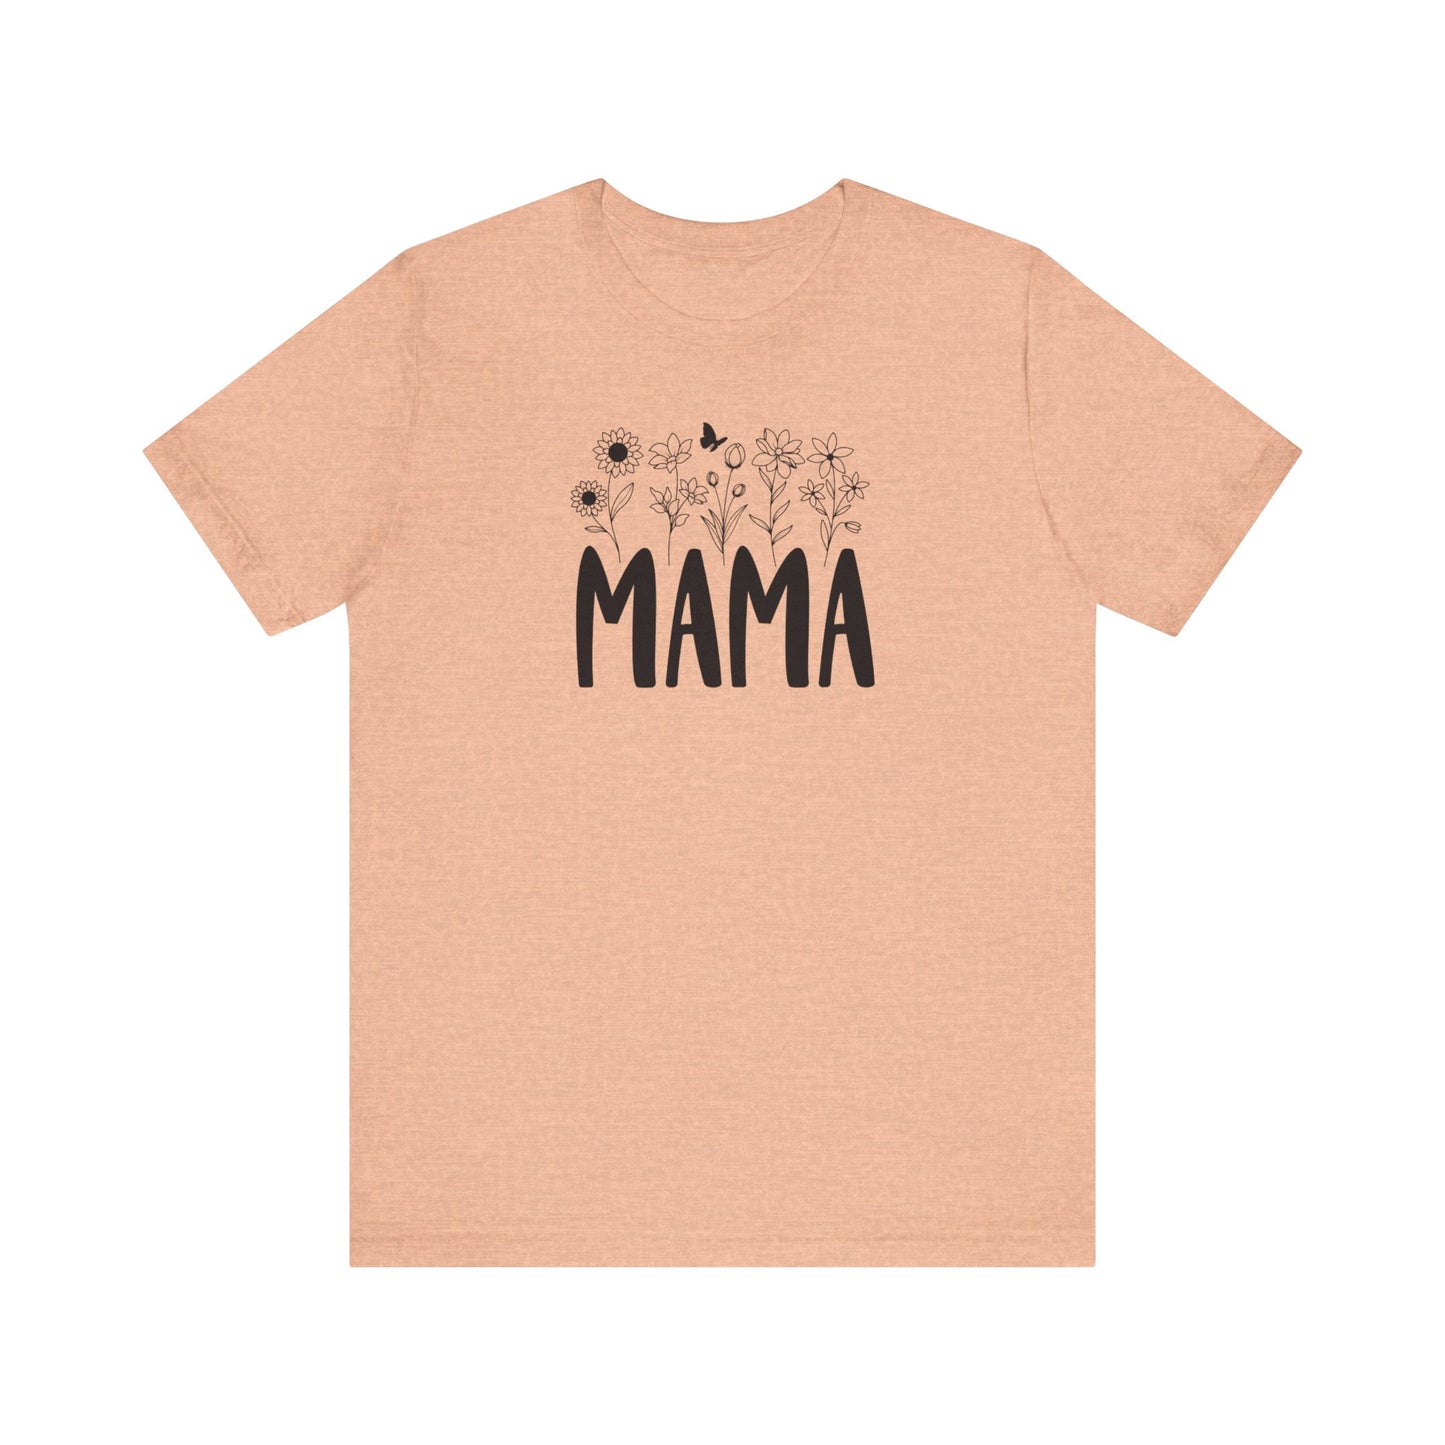 Mama Flowers Shirt, Mother's Day Gift, Mom Tee, Mama Floral Tshirt (Mom-40)